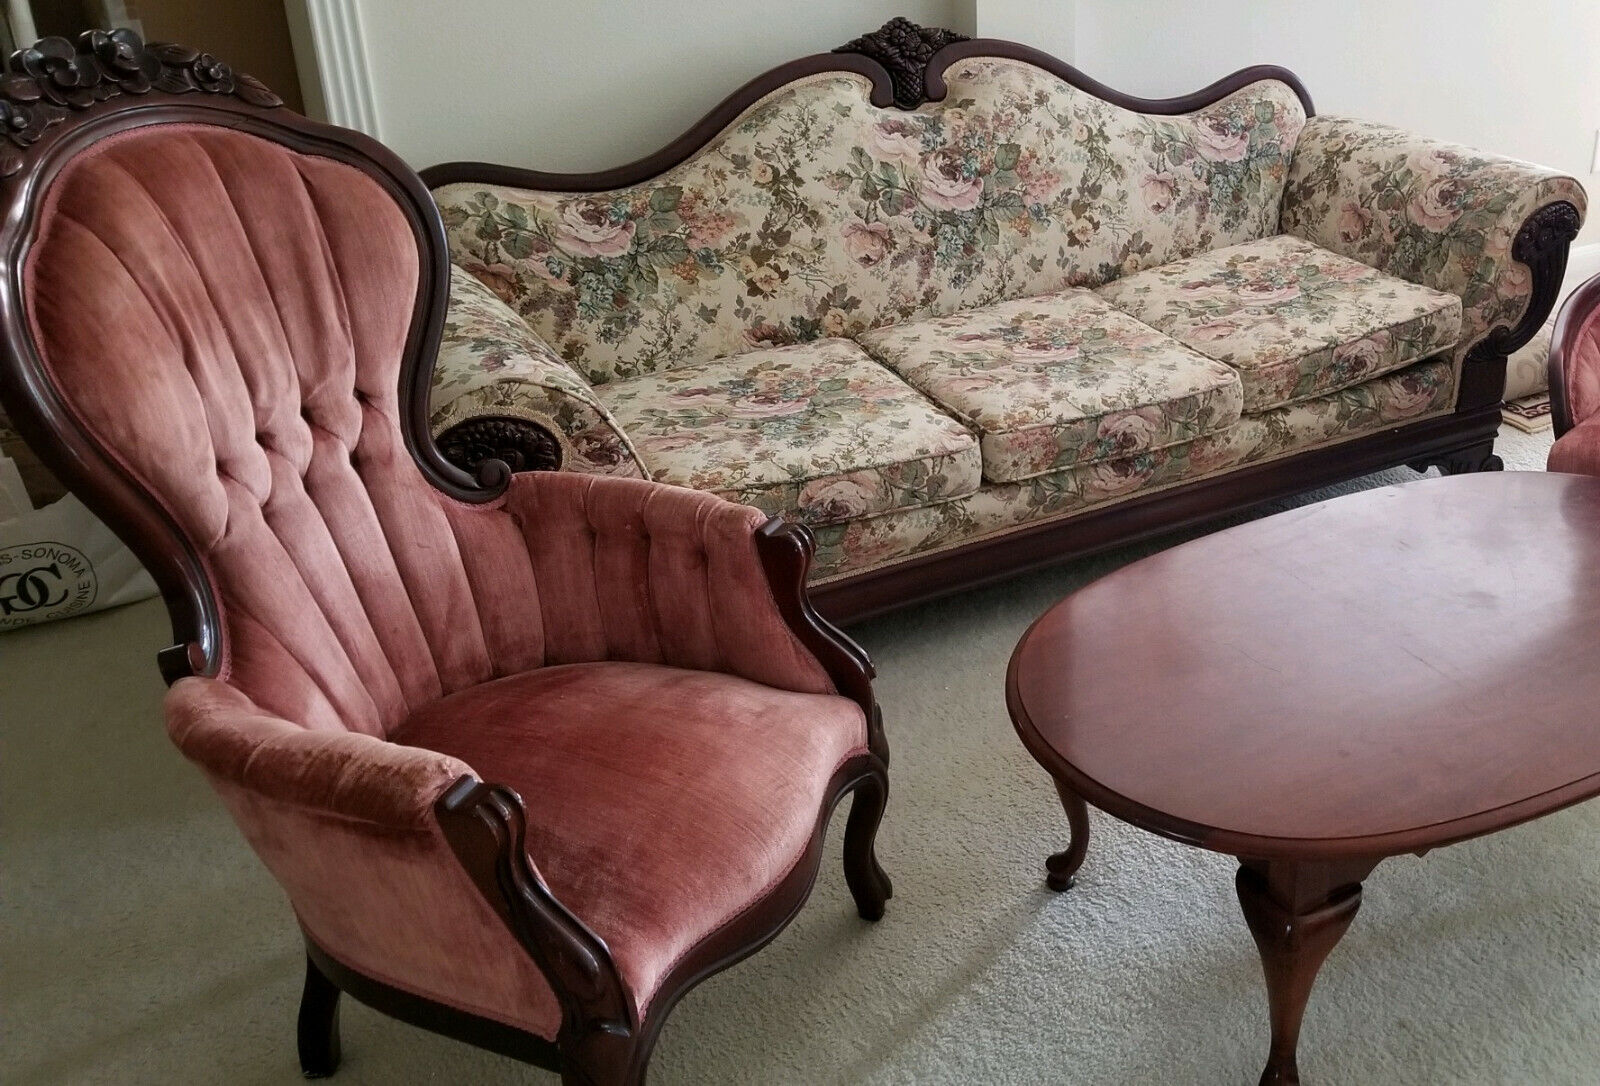 Vintage Victorian Empire Style Sofa Couch-2 Gentlemans Chairs-Oval Coffee Table Empire